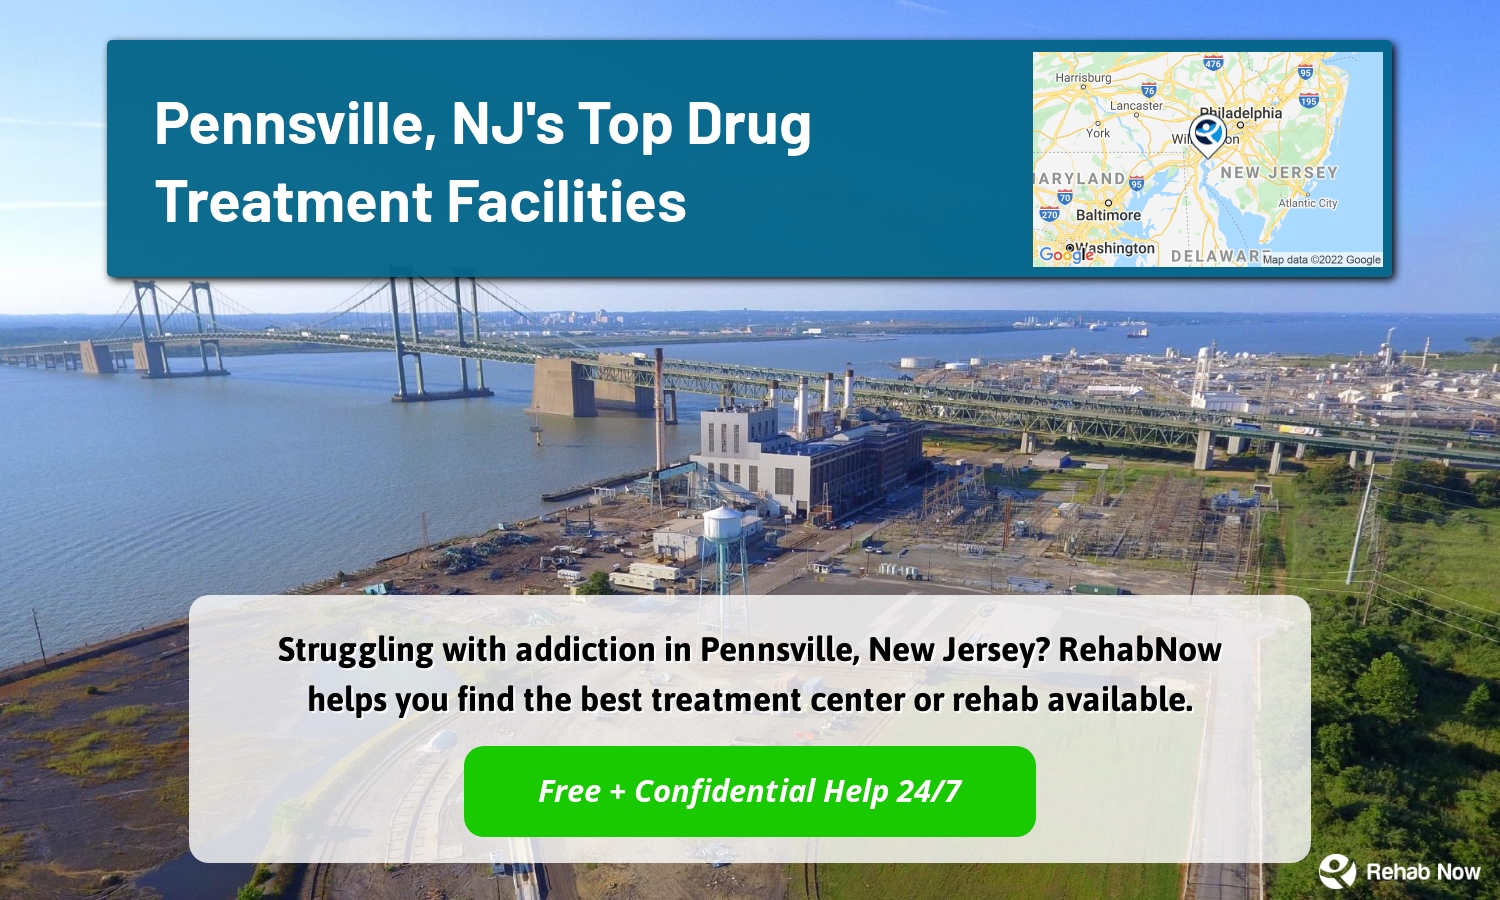 Struggling with addiction in Pennsville, New Jersey? RehabNow helps you find the best treatment center or rehab available.